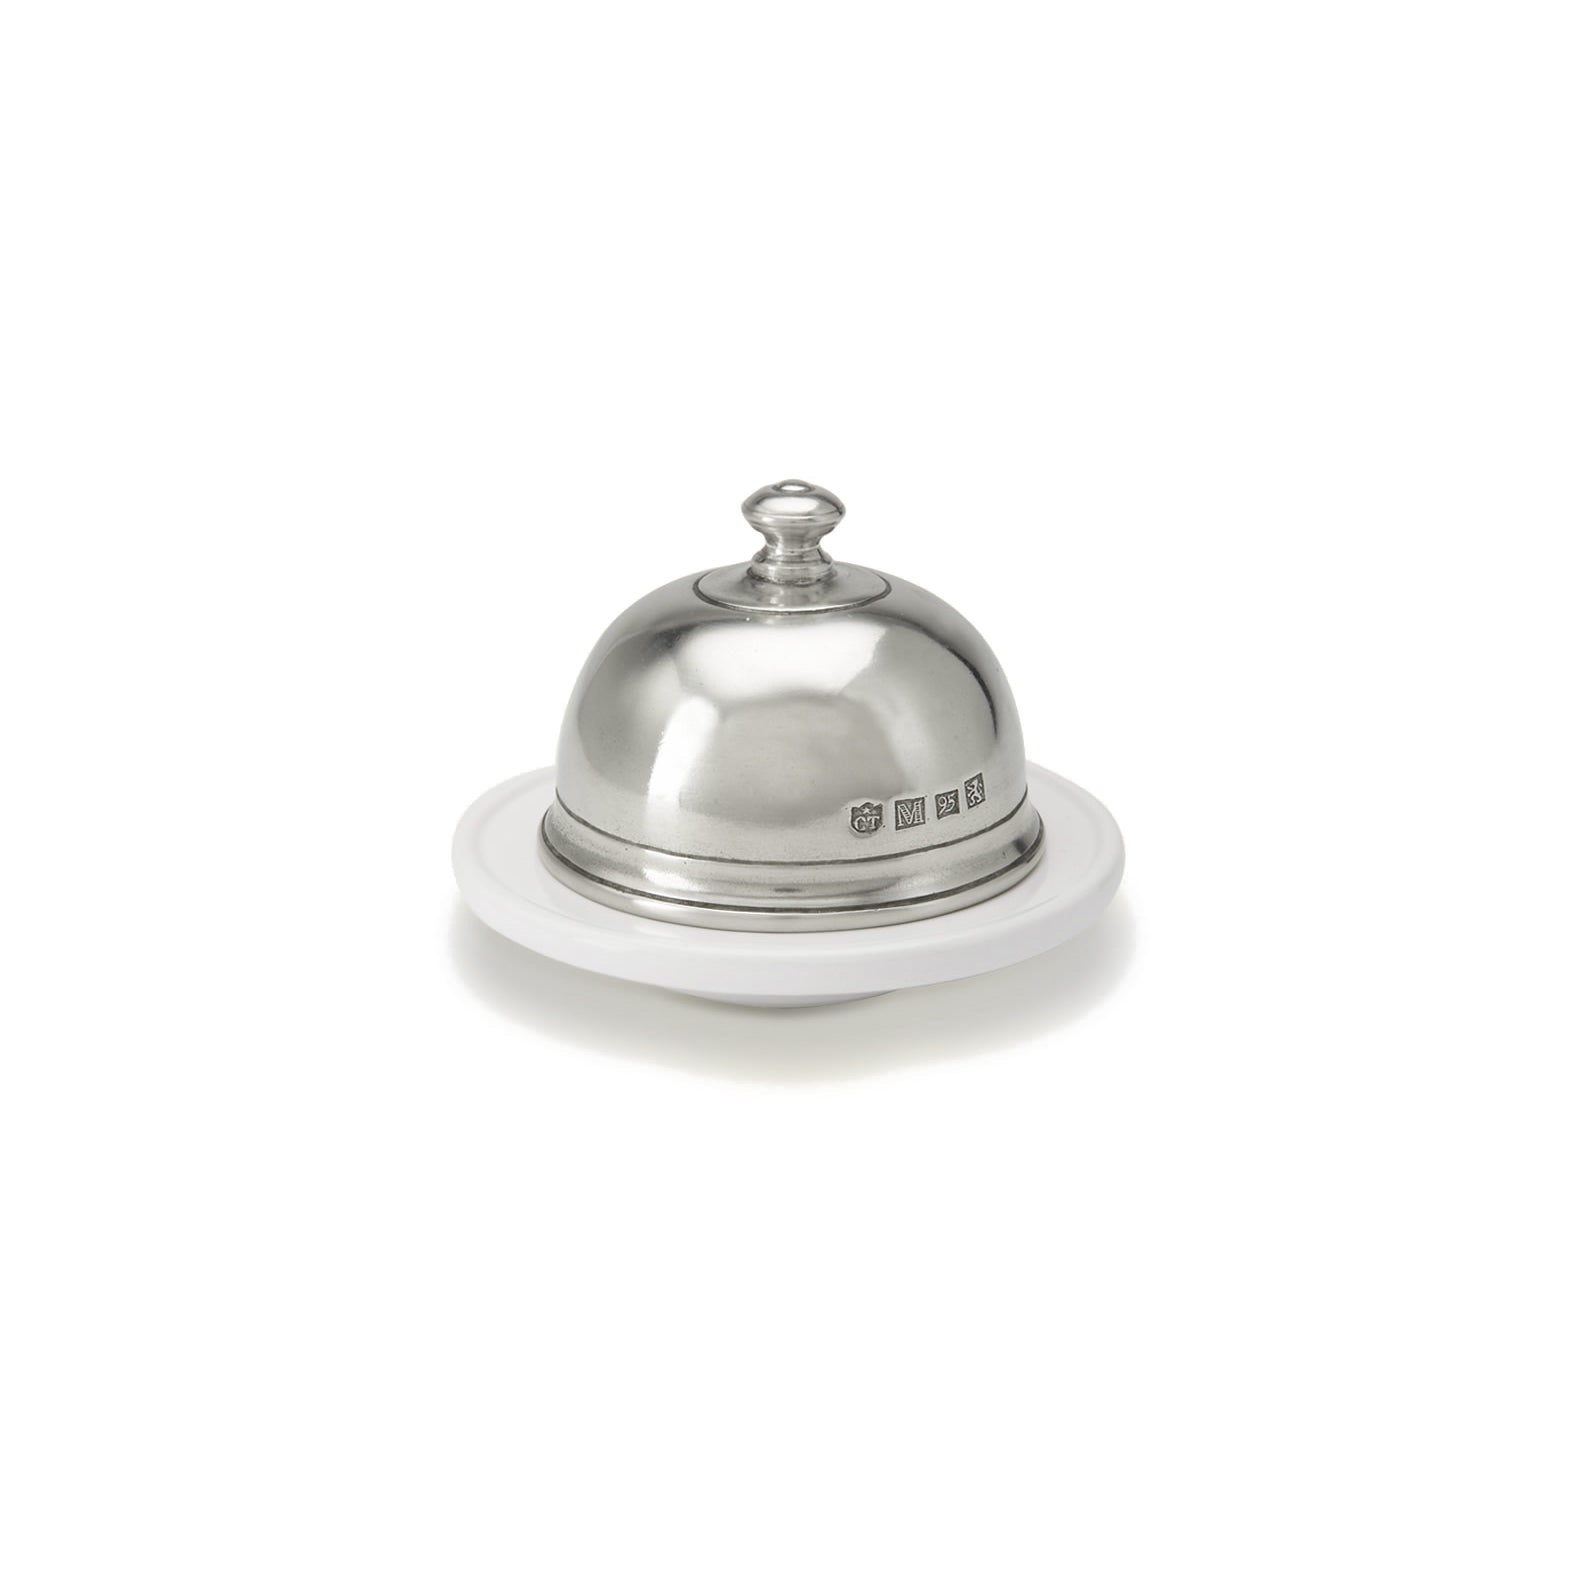 Convivio Ceramic Base with Solid Pewter Butter Dome-Timothy De Clue Collection 